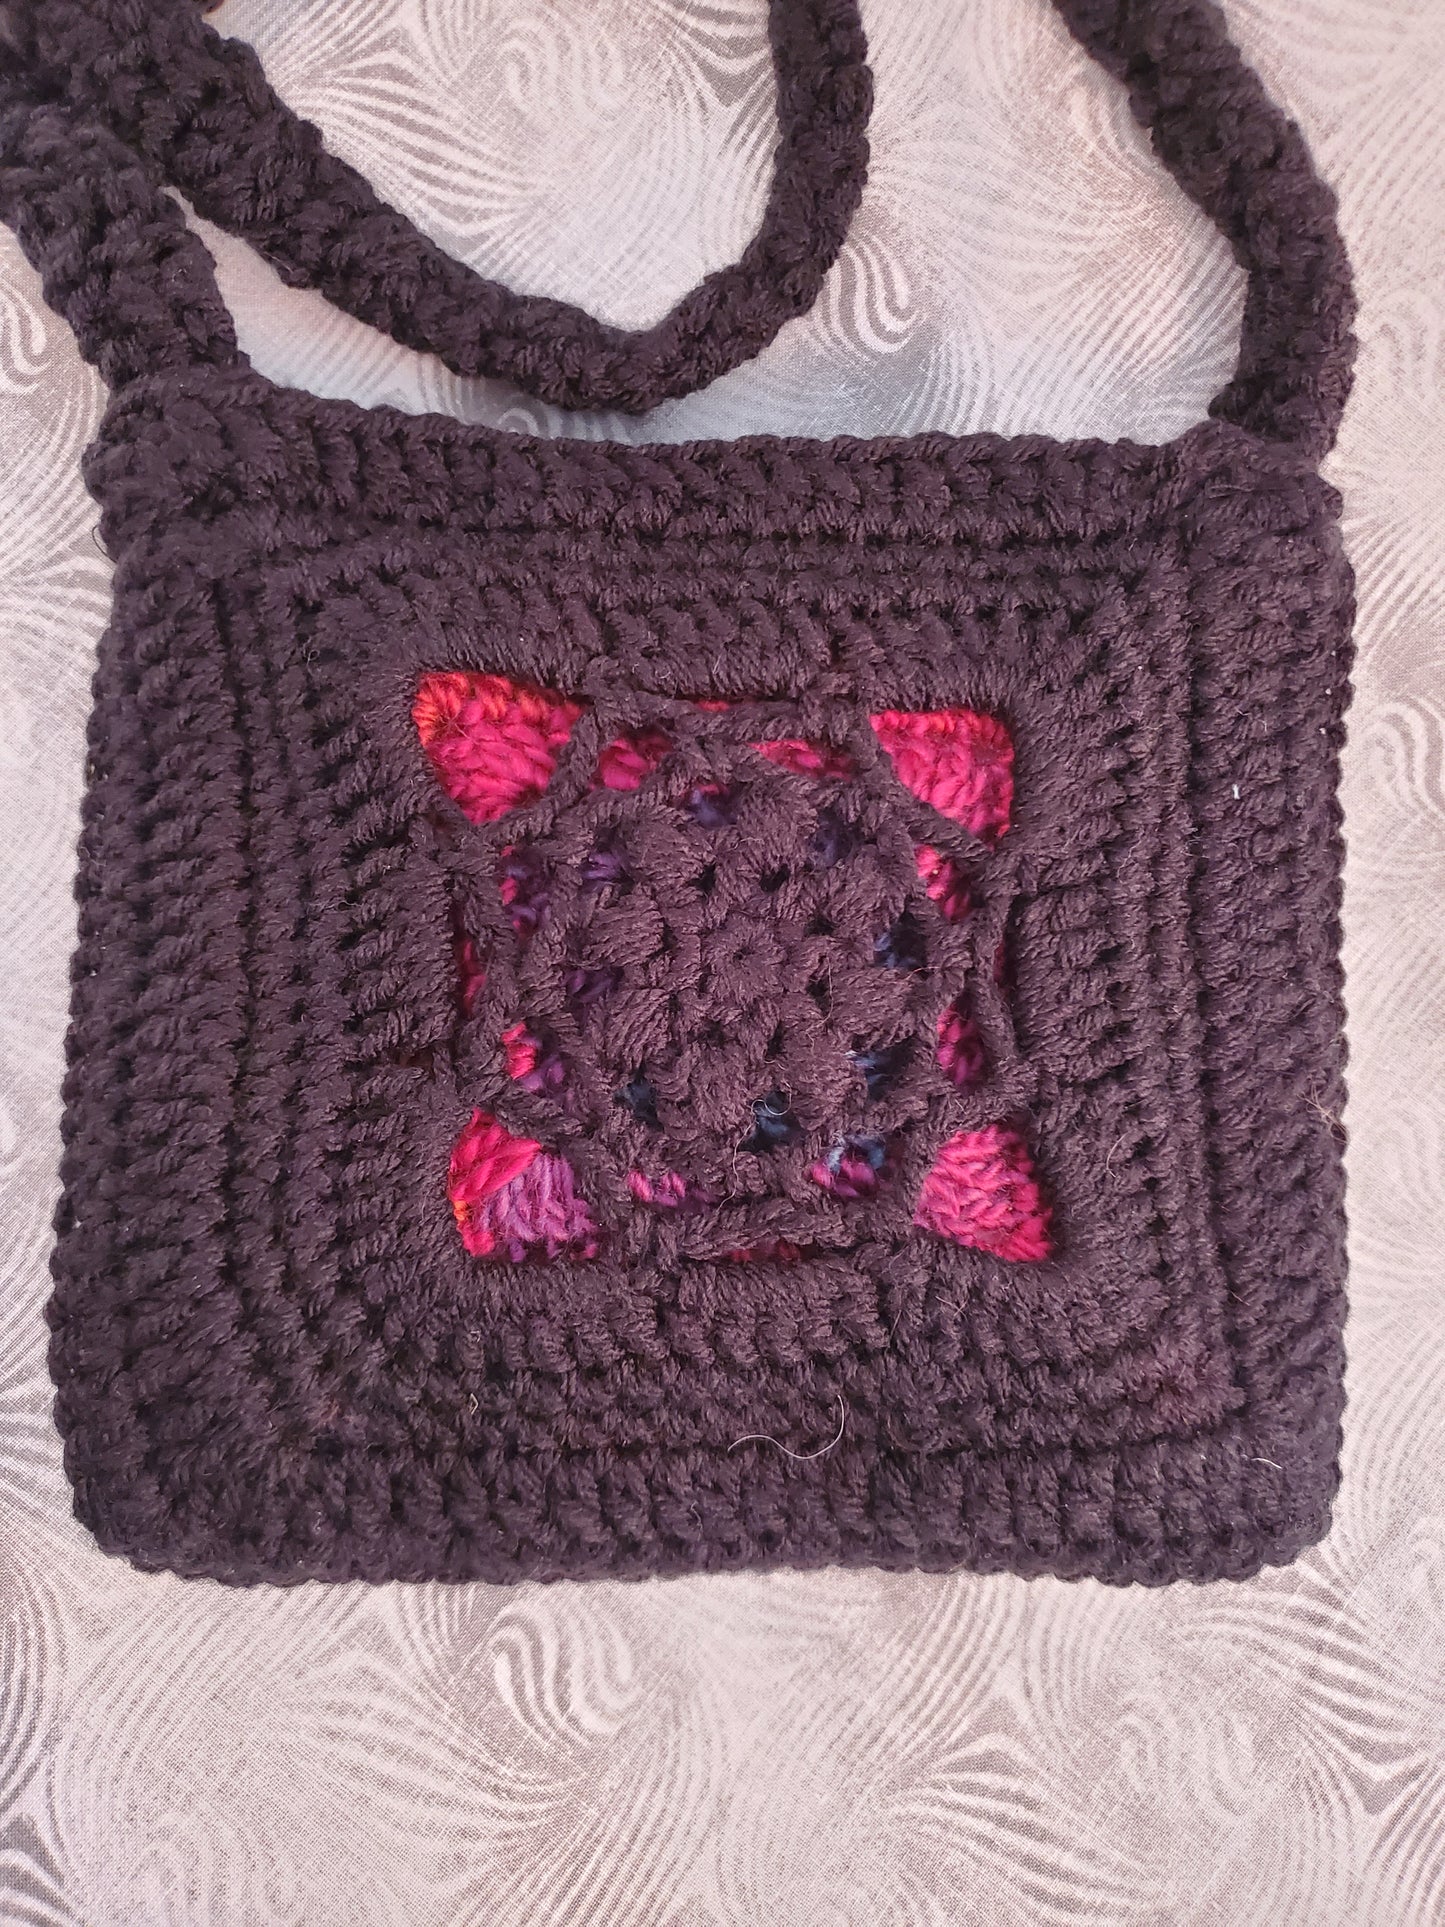 Stained Glass Crochet Purse